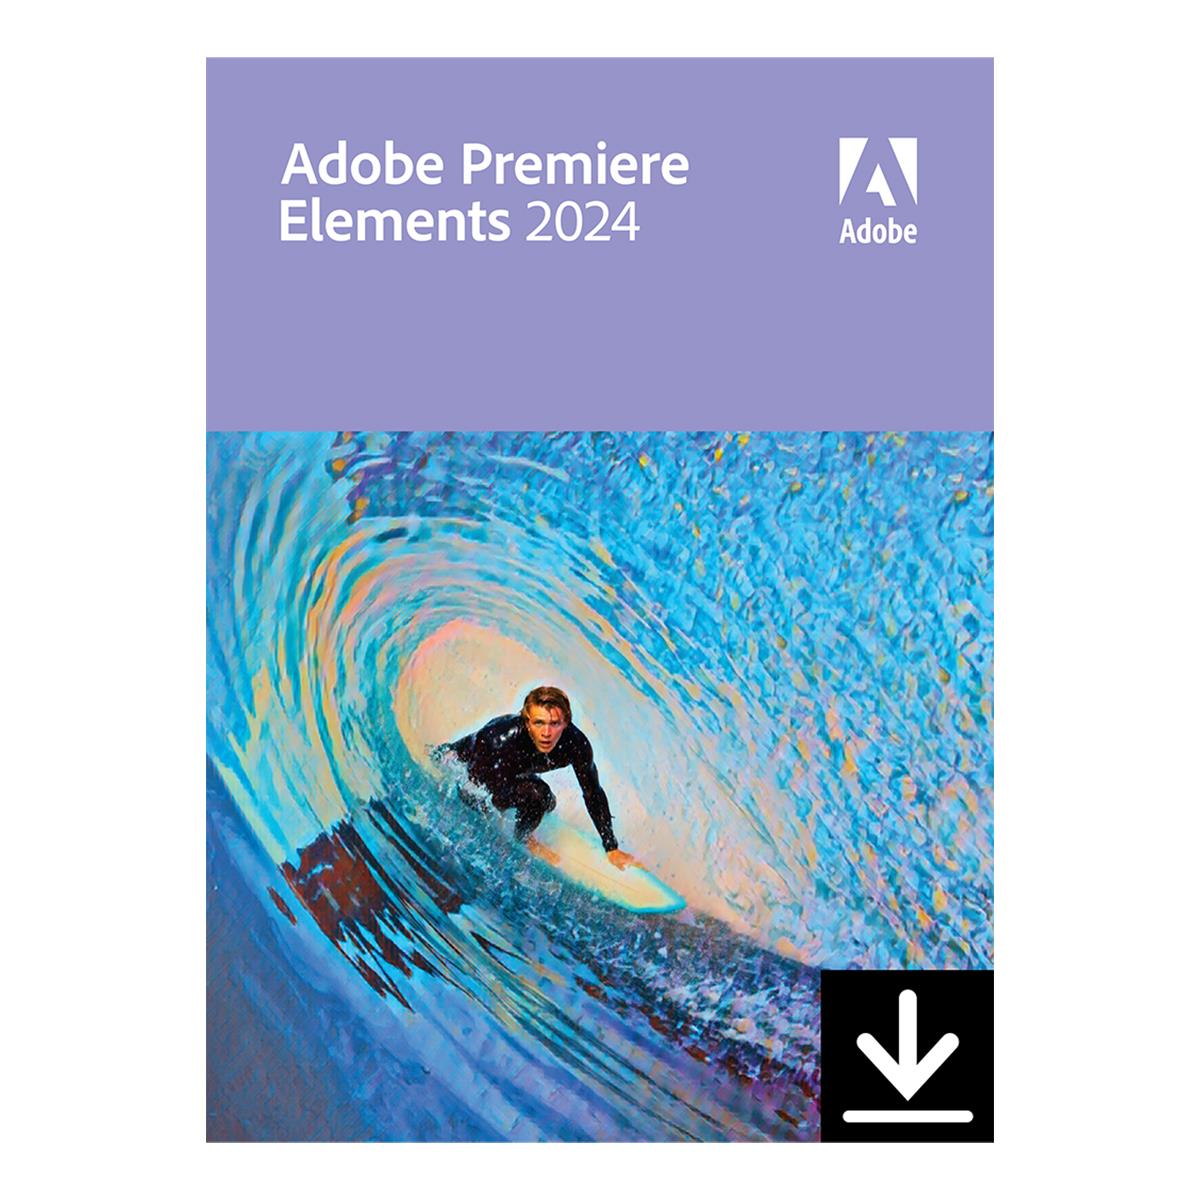 Image of Adobe Premiere Elements 2024 for Windows